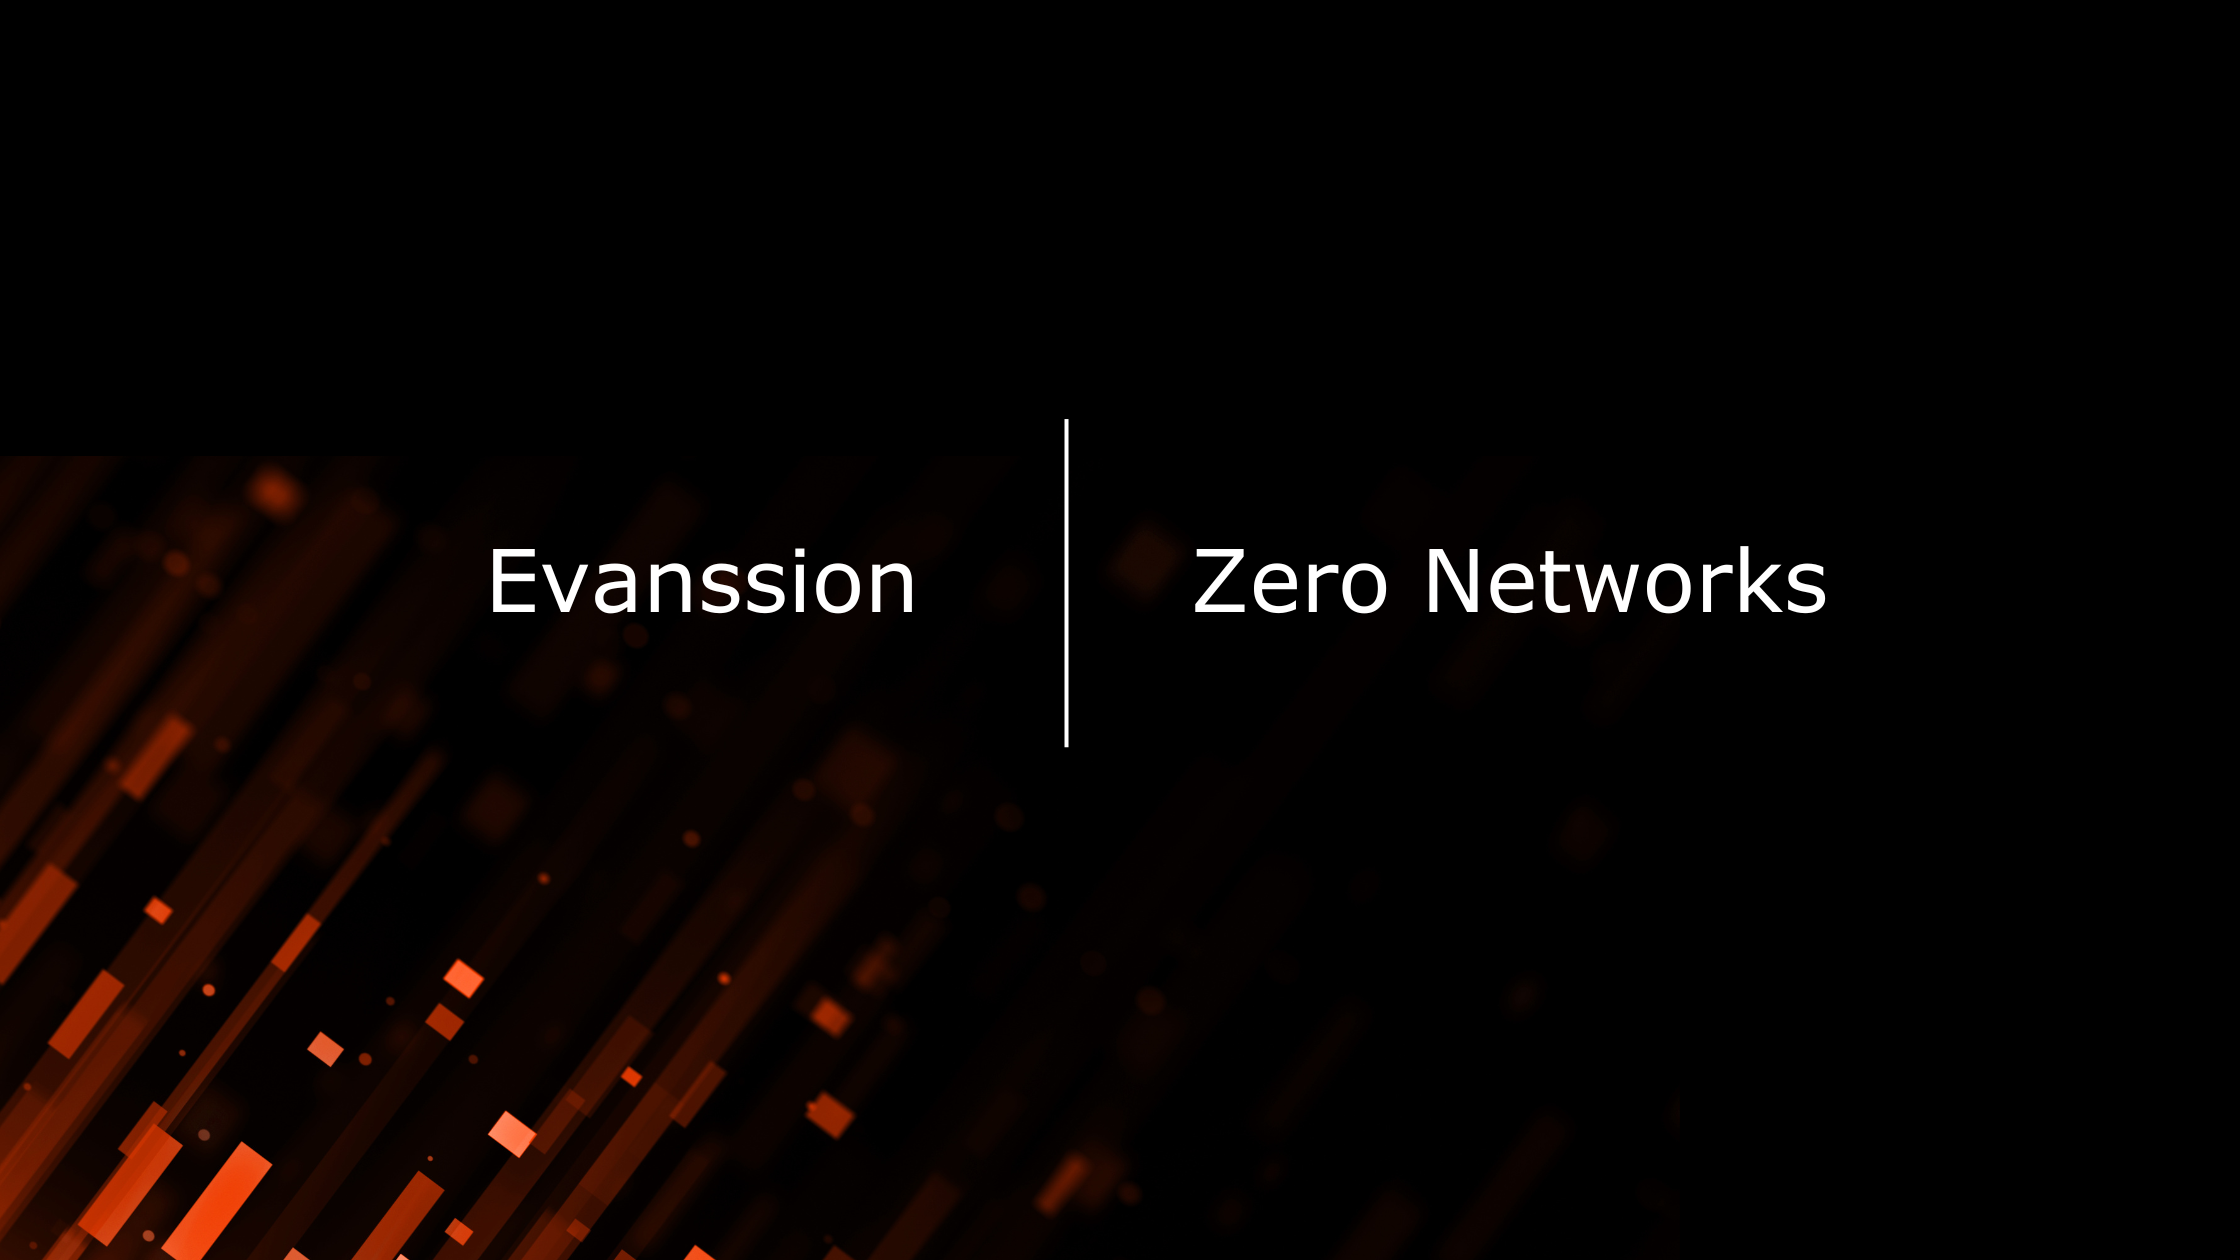 Evanssion and Zero Networks announce distribution partnership